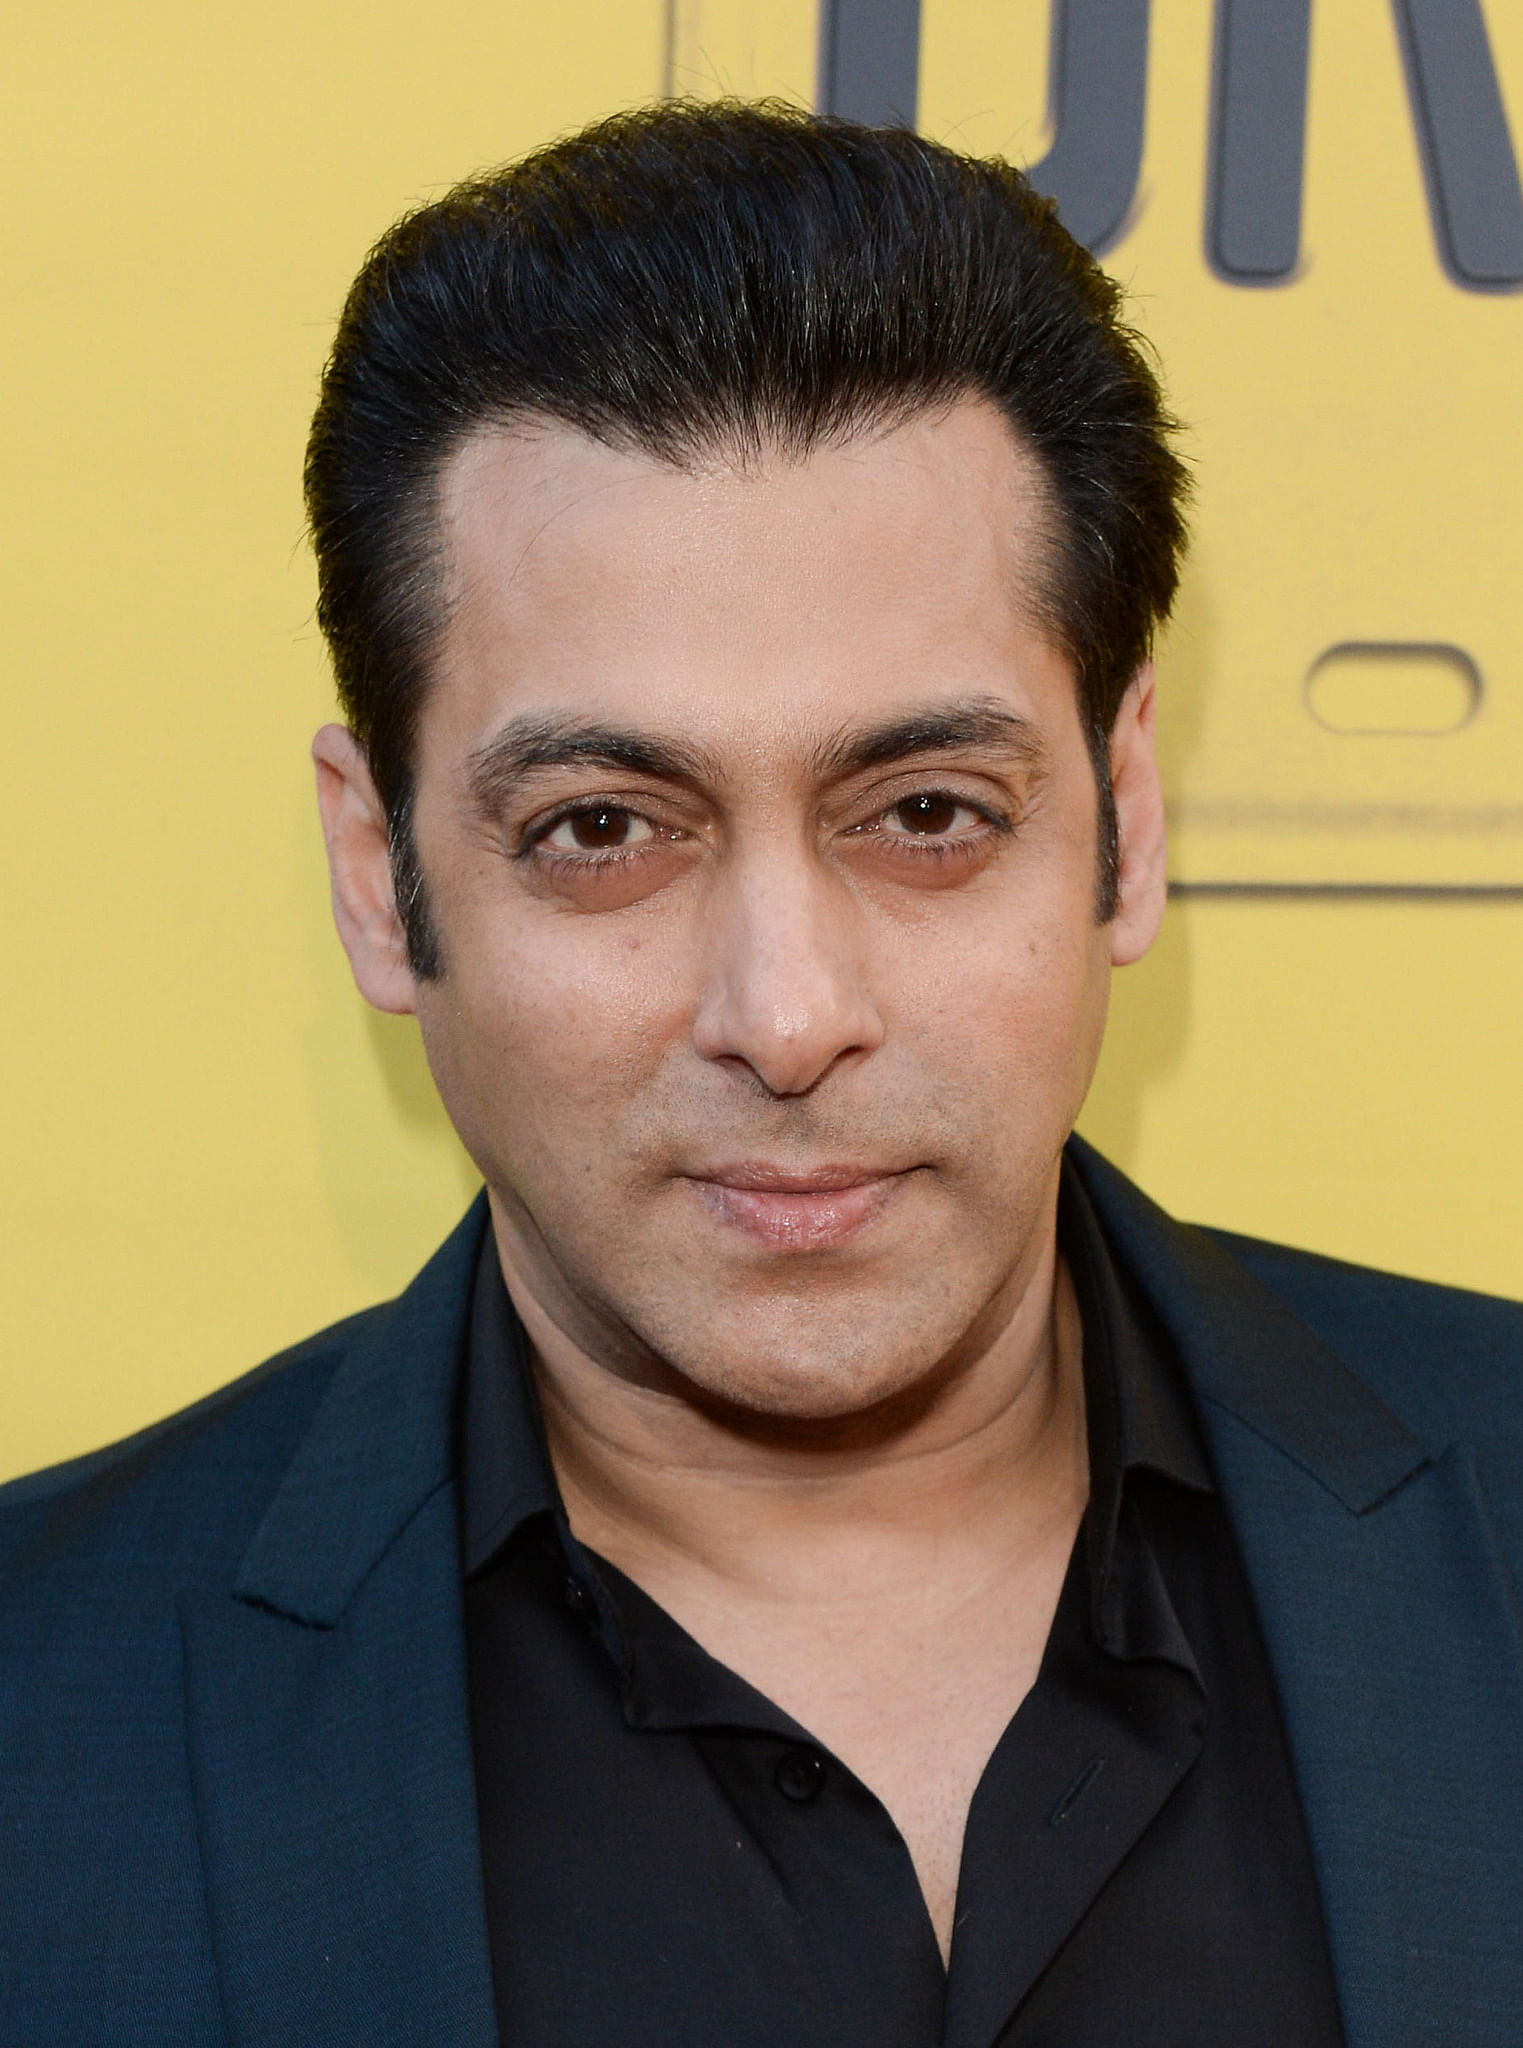 Salman Khan is one of the biggest names in Bollywood. (Credit: IMDB)